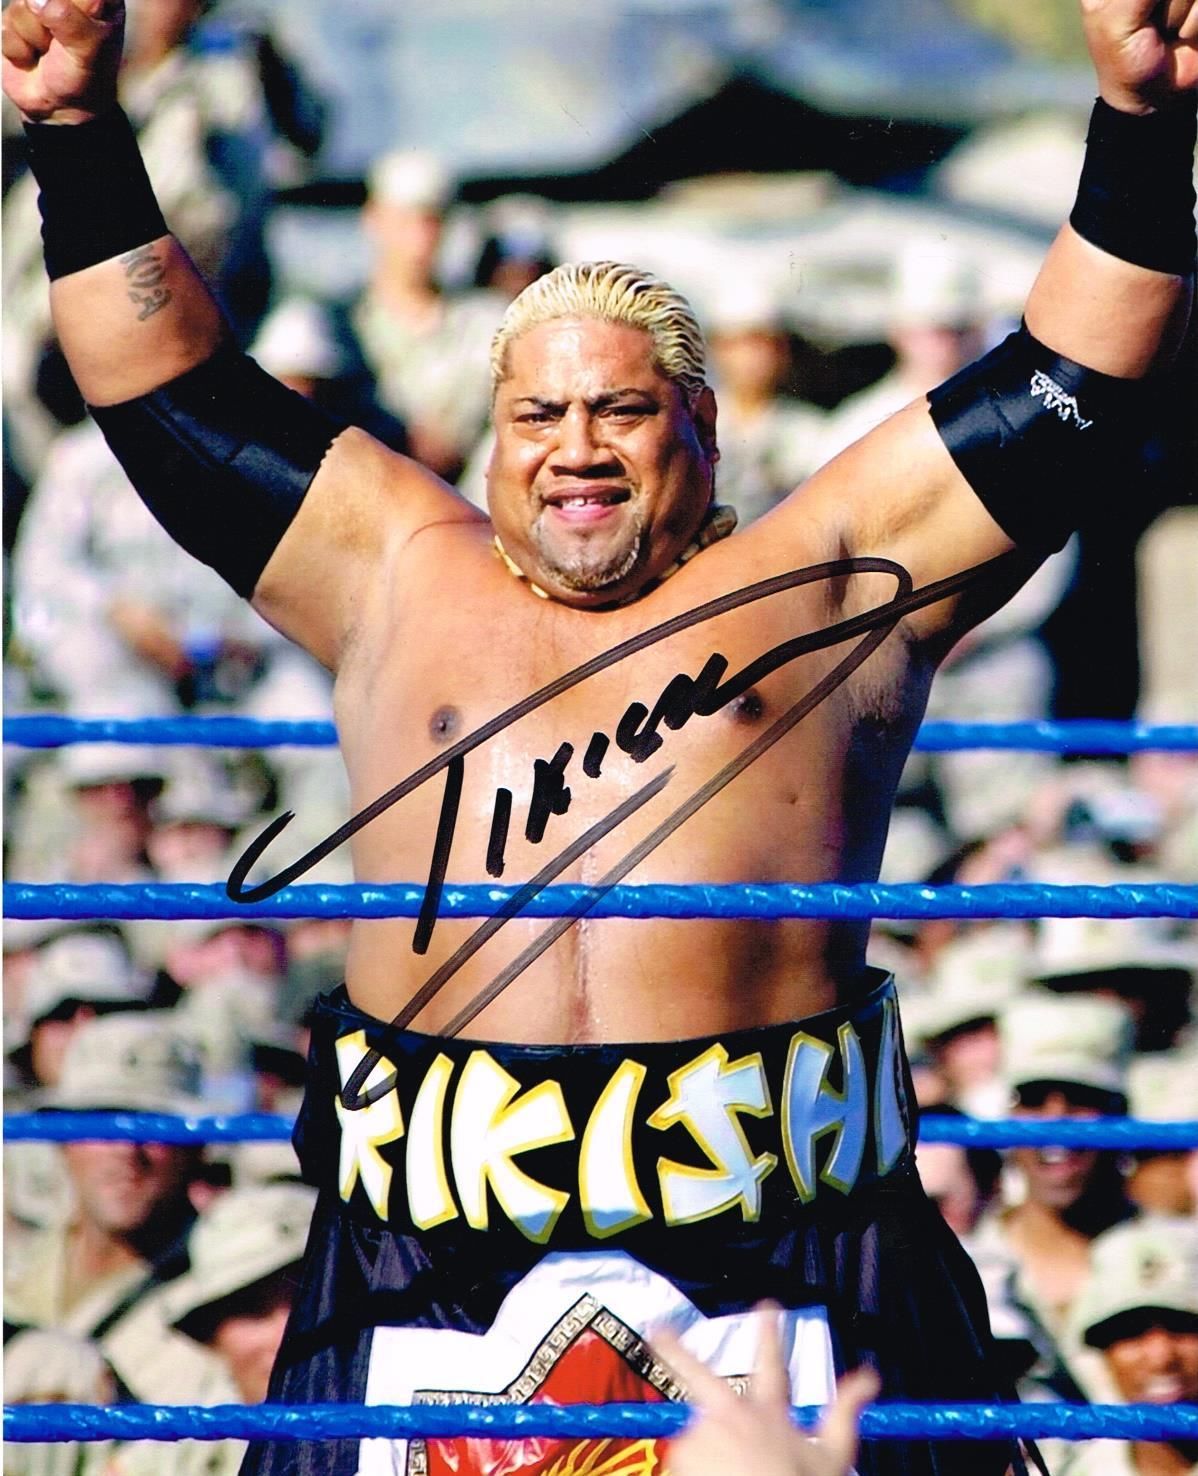 wwe rikishi autographed photo auto signed autograph contact the coolest celebrities free